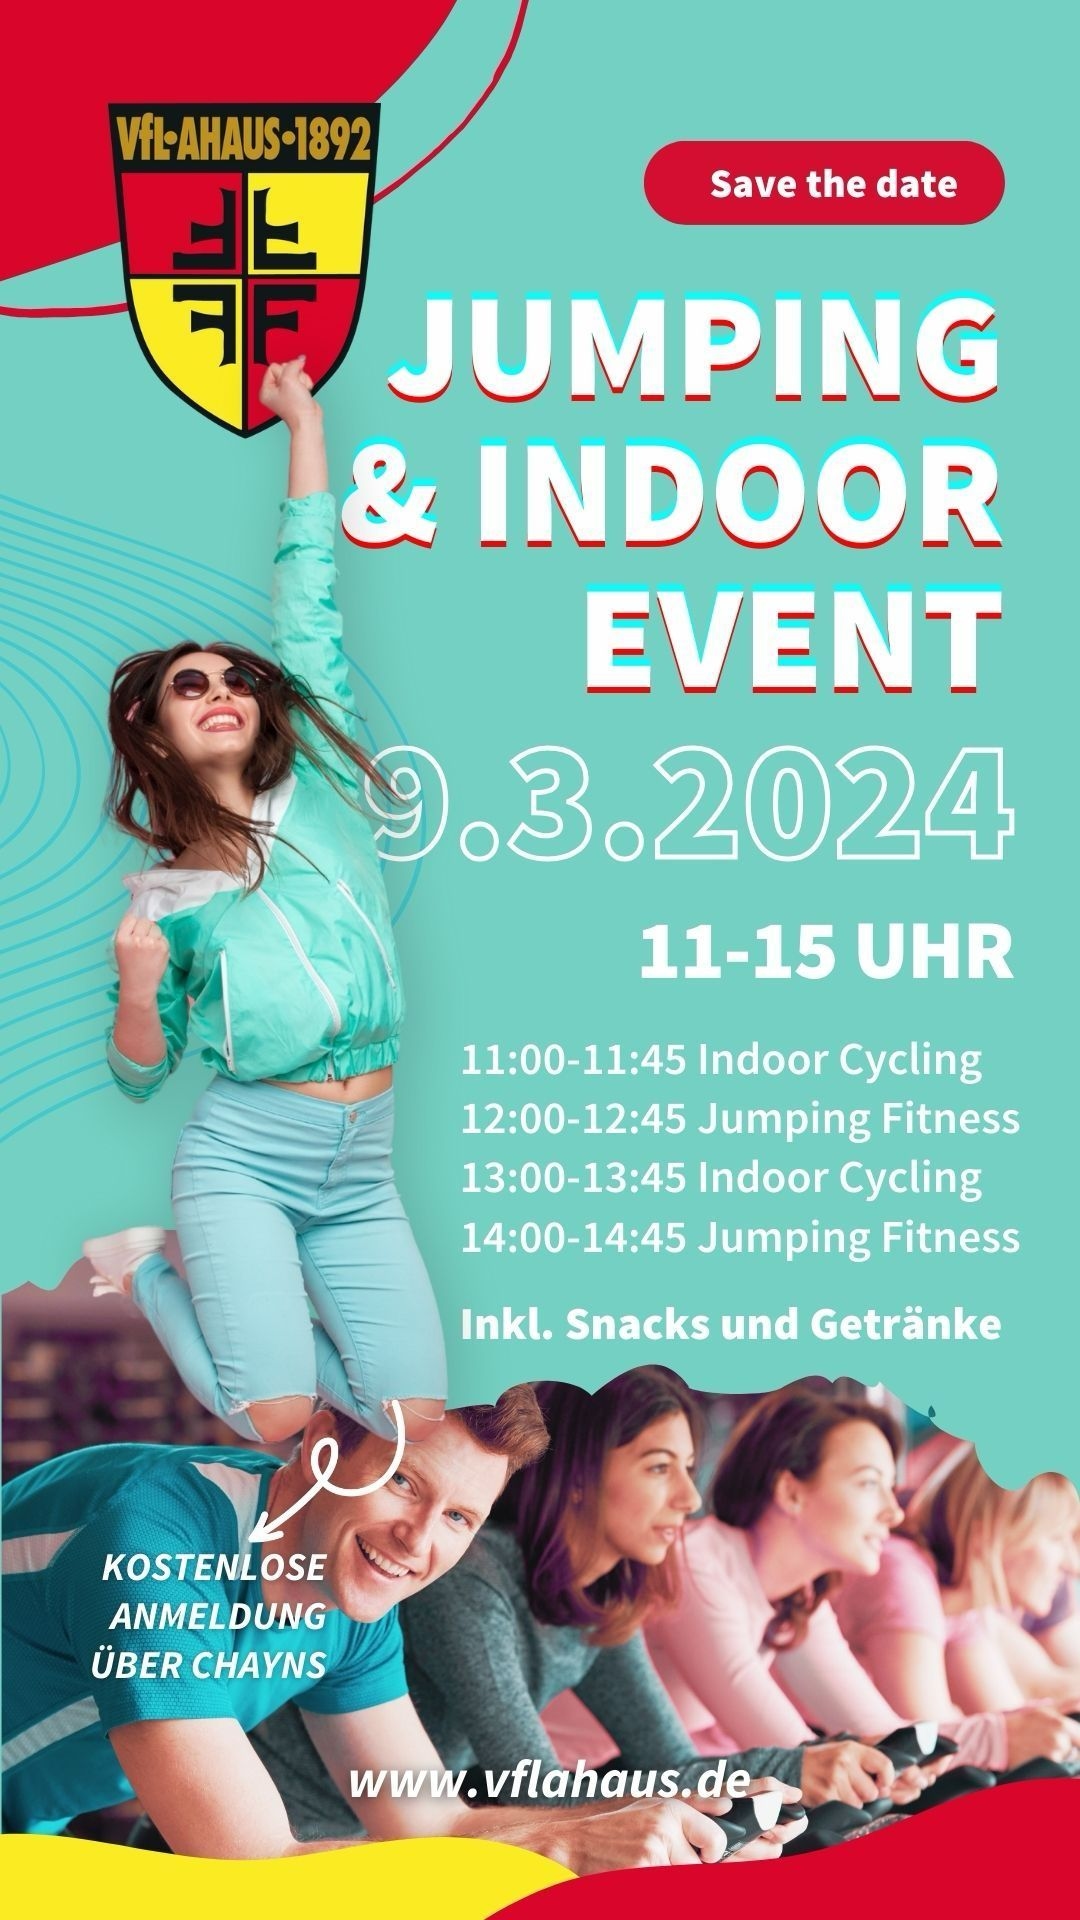 Jumping & Indoor Event